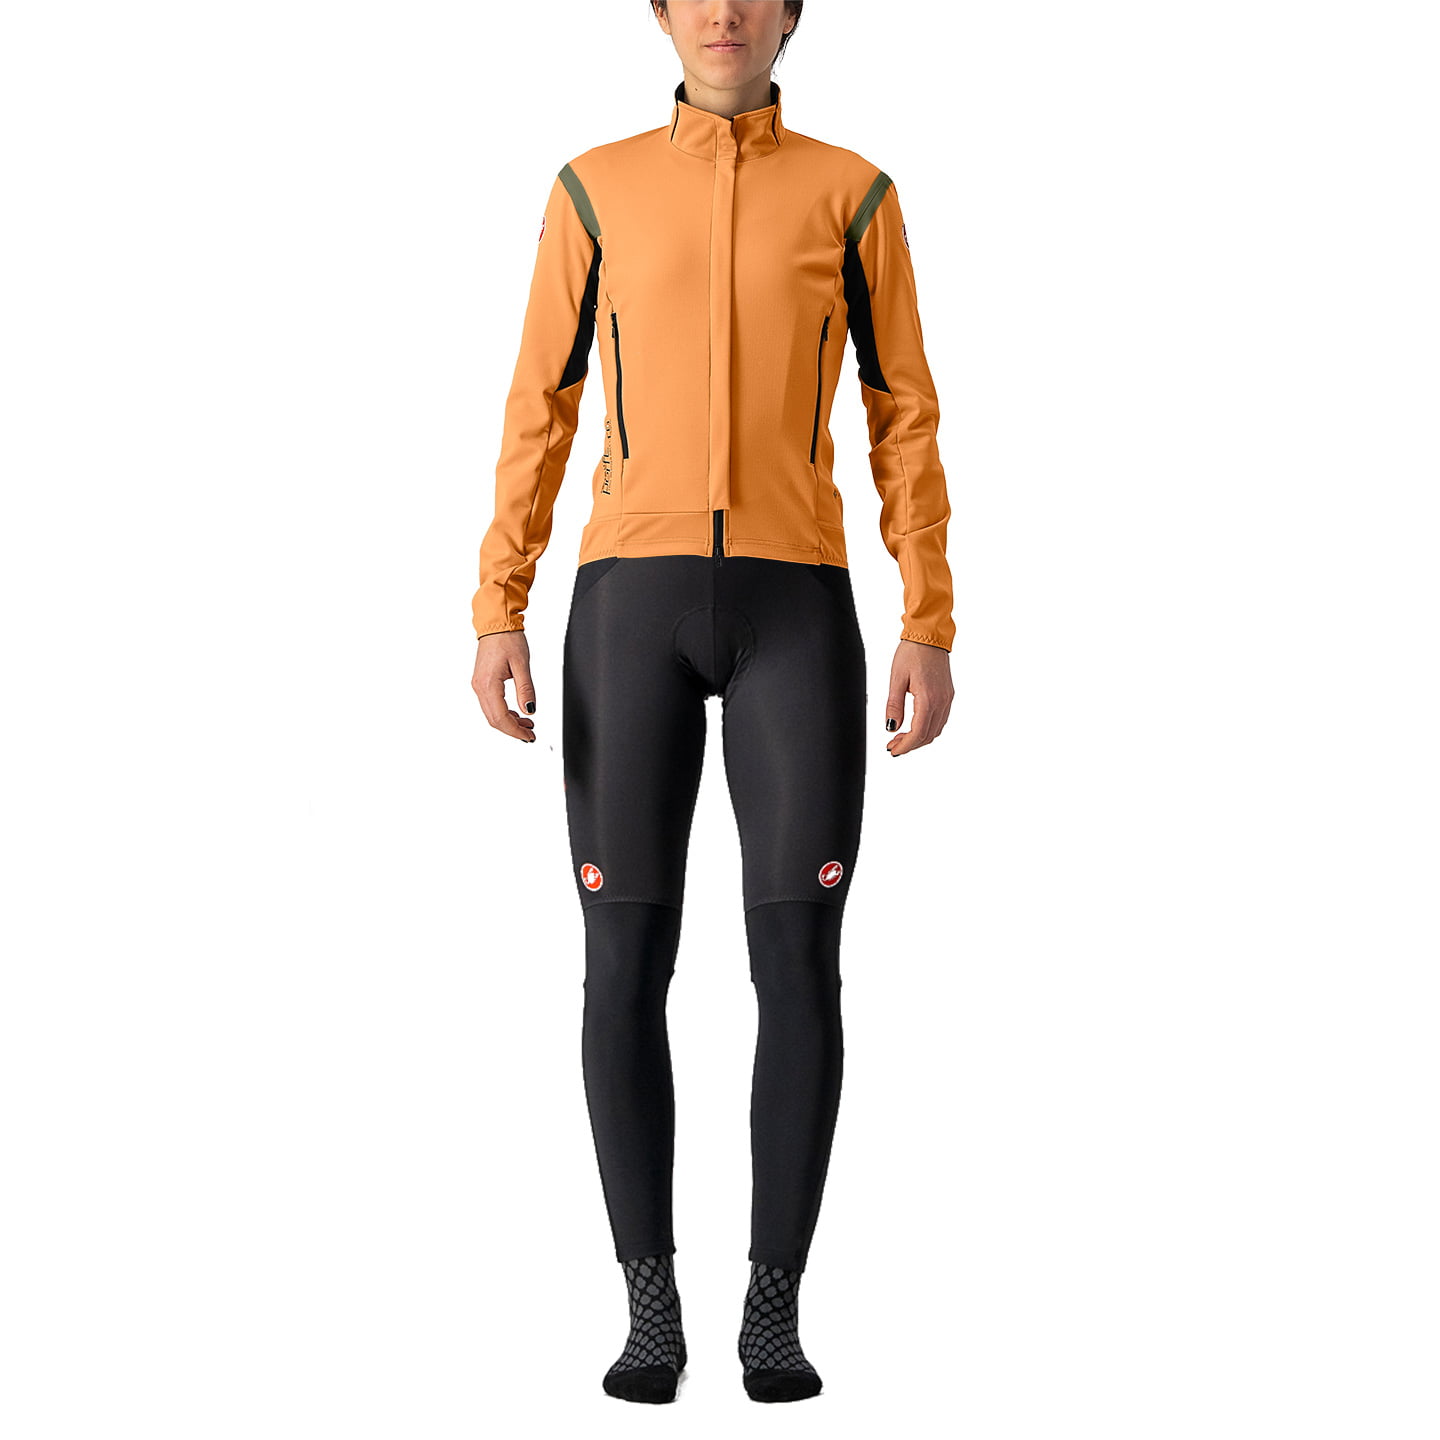 CASTELLI Perfetto RoS 2 Women’s Set (winter jacket + cycling tights) Women’s Set (2 pieces)